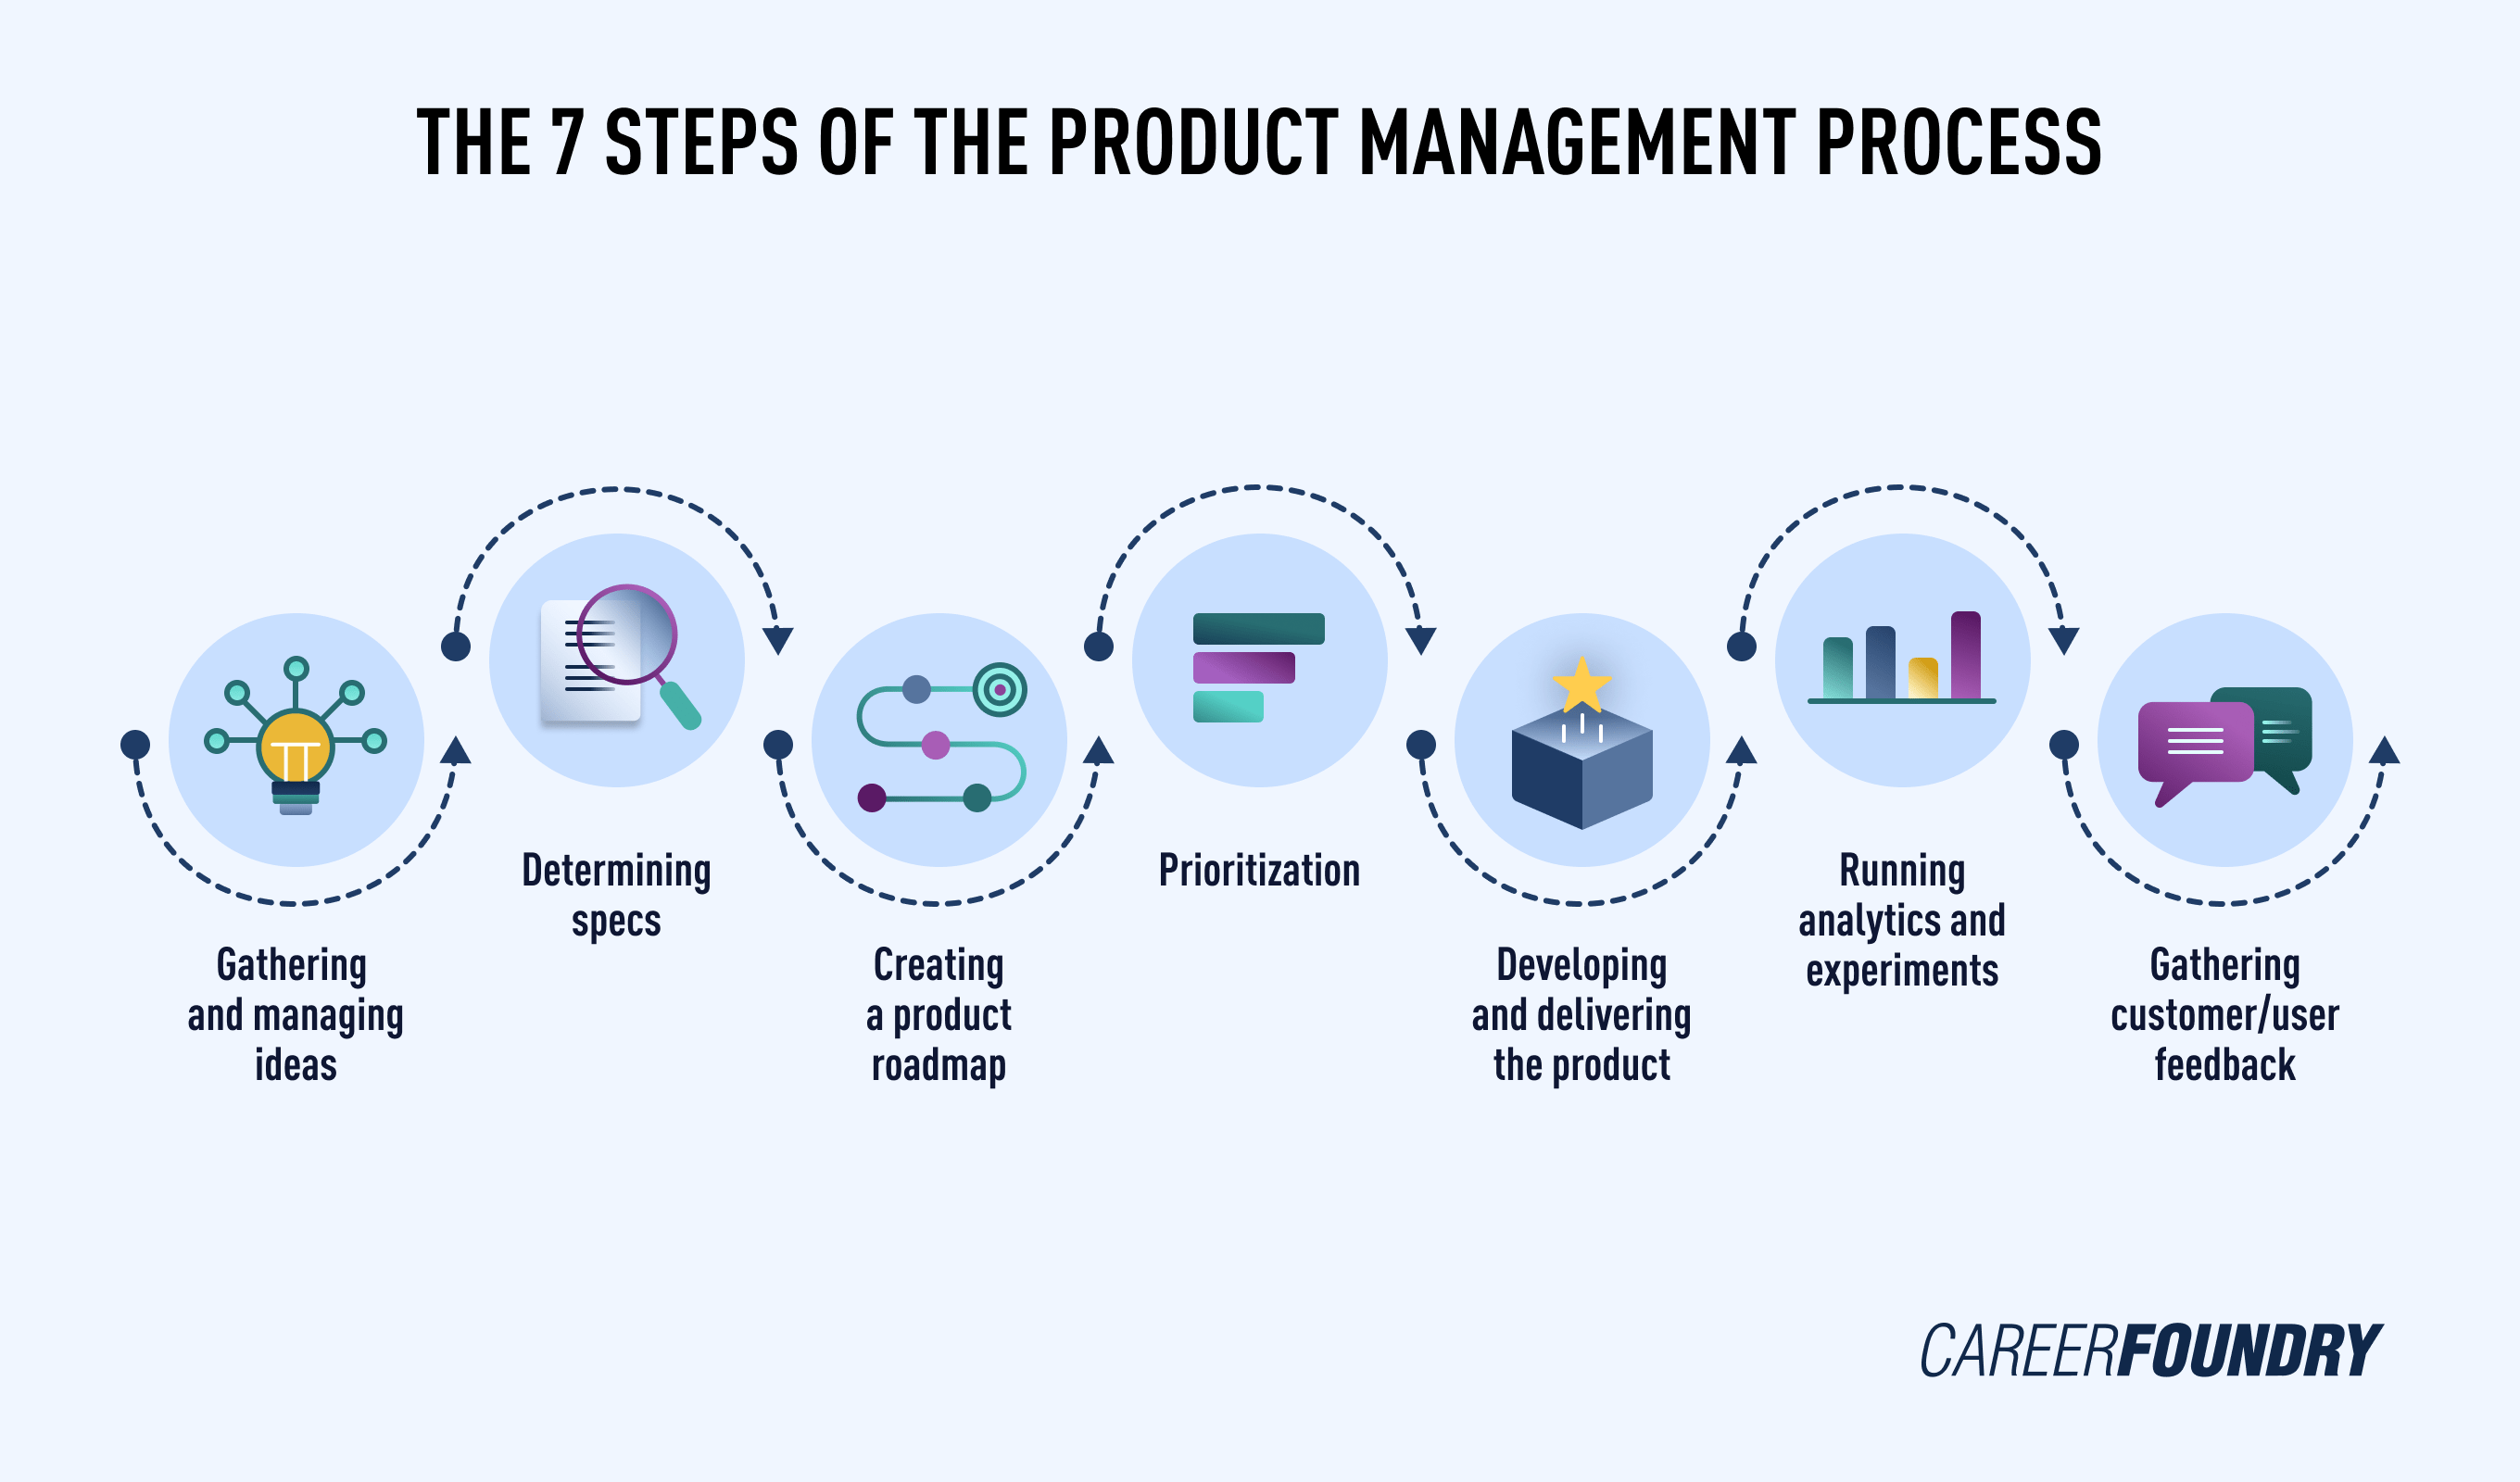 Illustration of the 7 steps of the product management process.